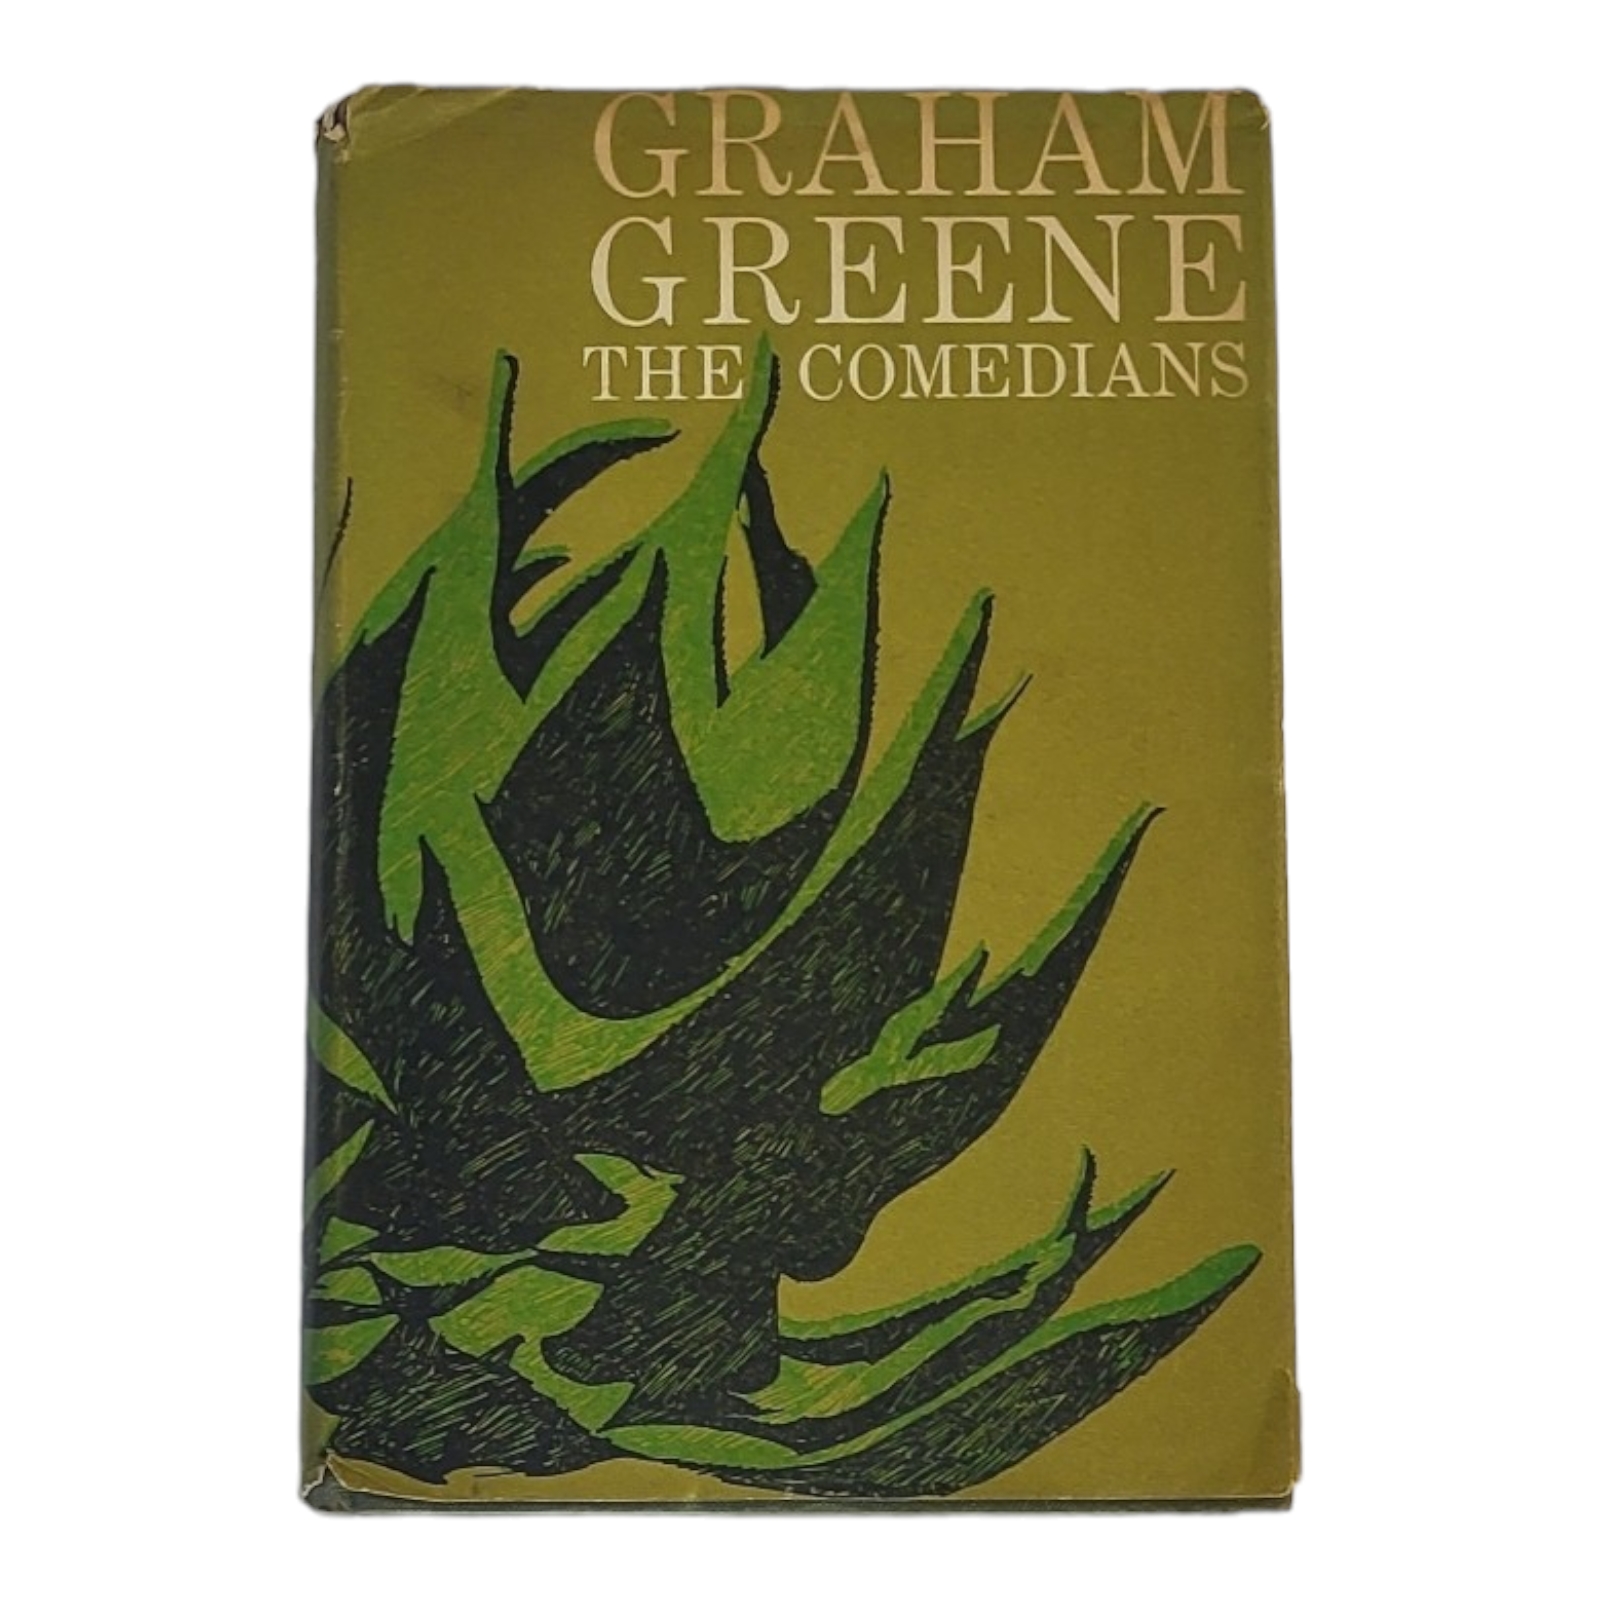 GRAHAM GREENE, THE COMEDIANS, DUST JACKET BY IVAN LAPPER First published for The Bodley Head Ltd, by